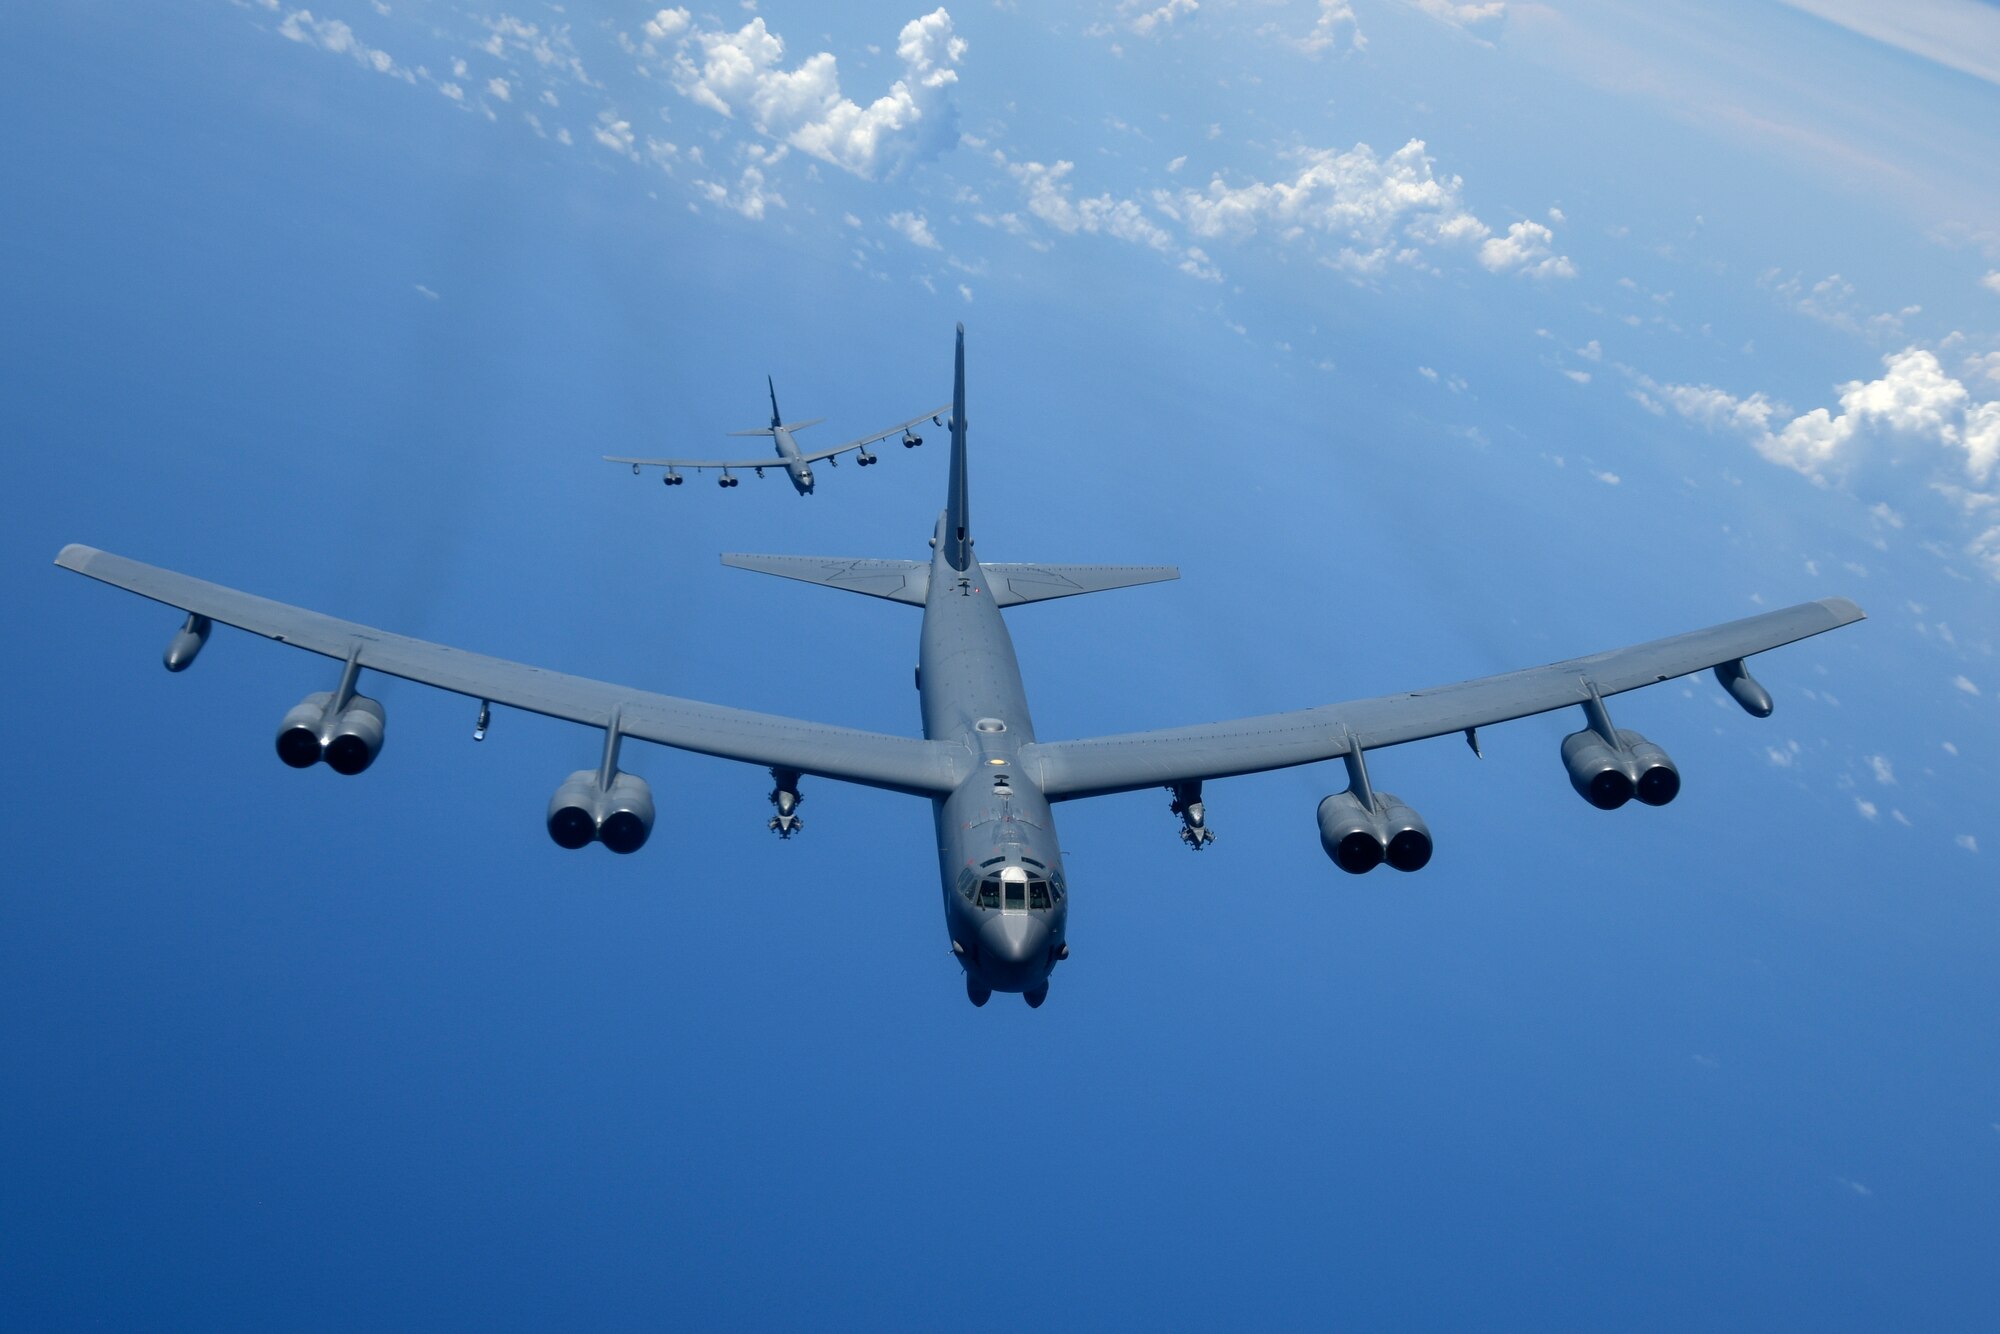 B-52H Stratofortress bombers fly over the Pacific Ocean